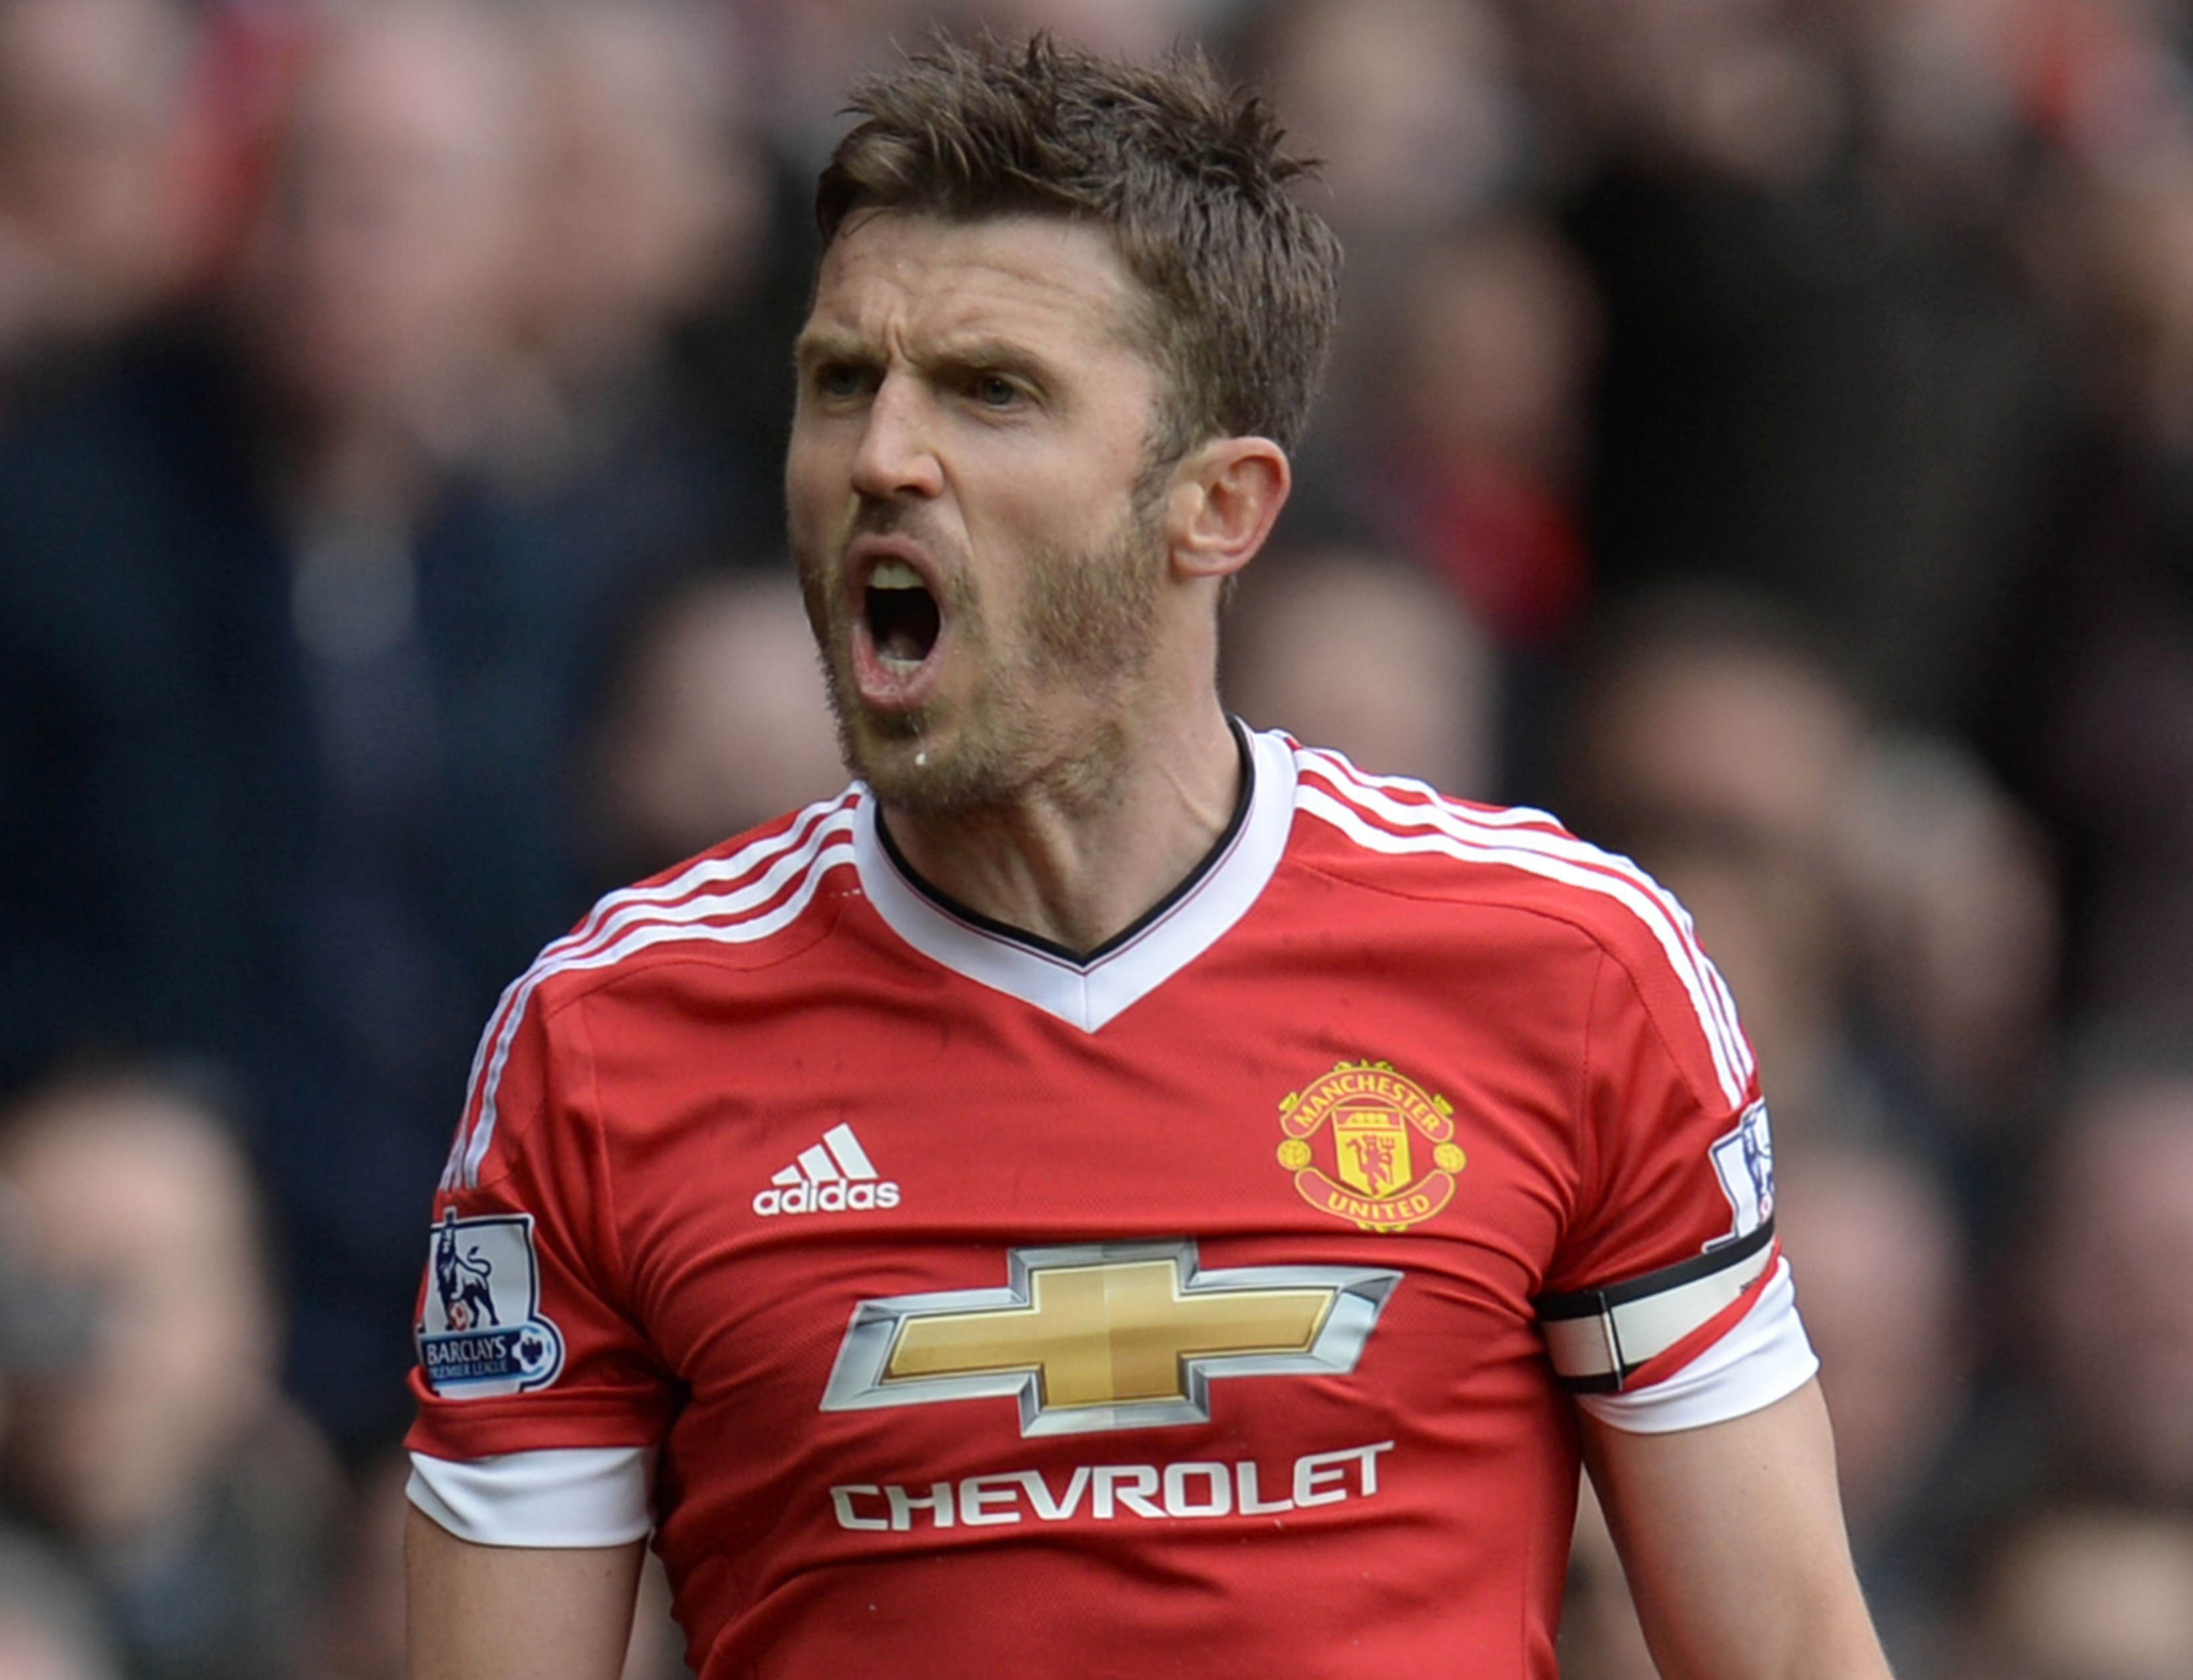 Football: Too early to write off Man United from title race, says Carrick